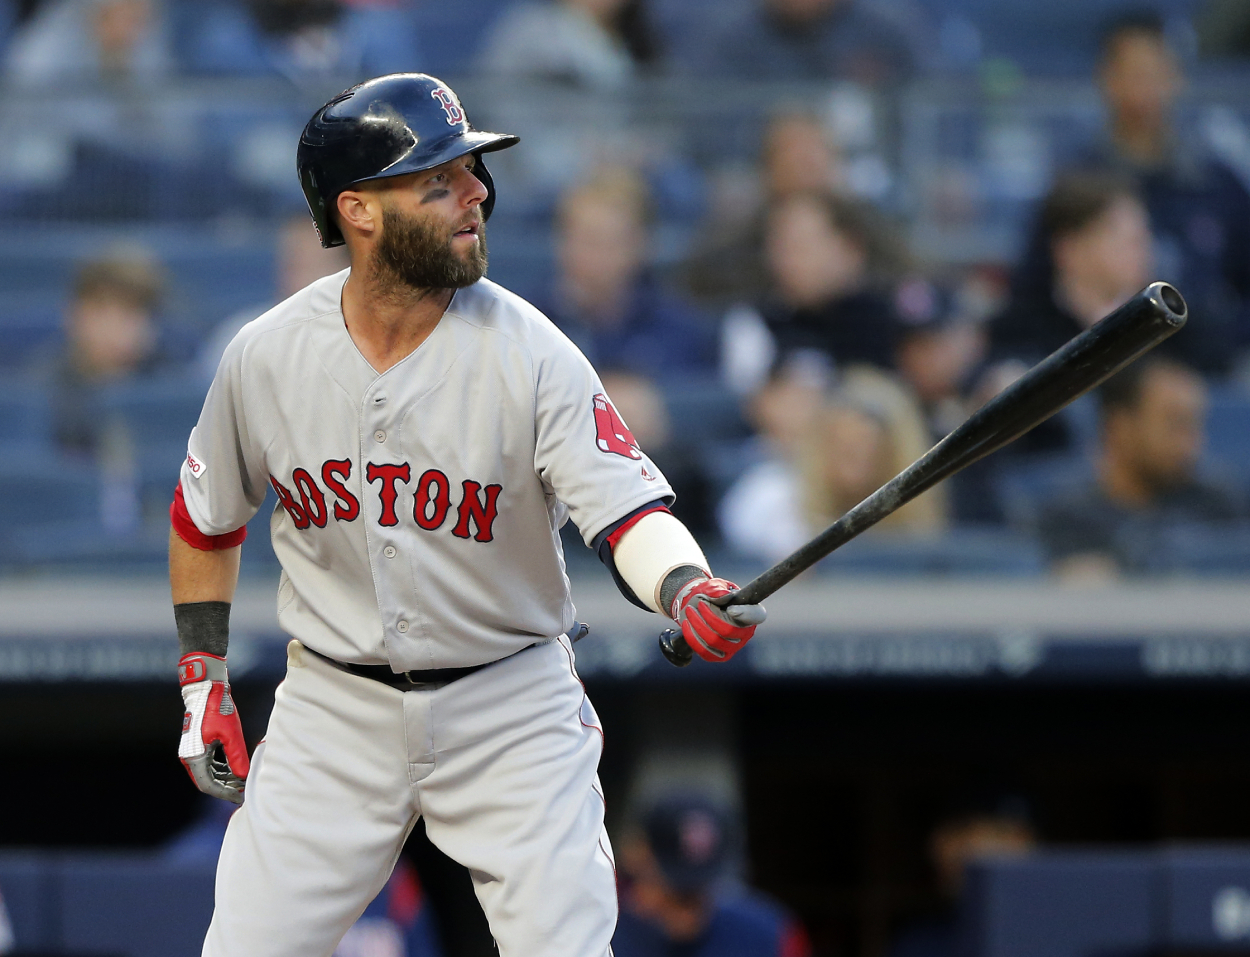 Dustin Pedroia Reveals His Recruiting Tactics and the Only Player He Failed to Bring to the Red Sox